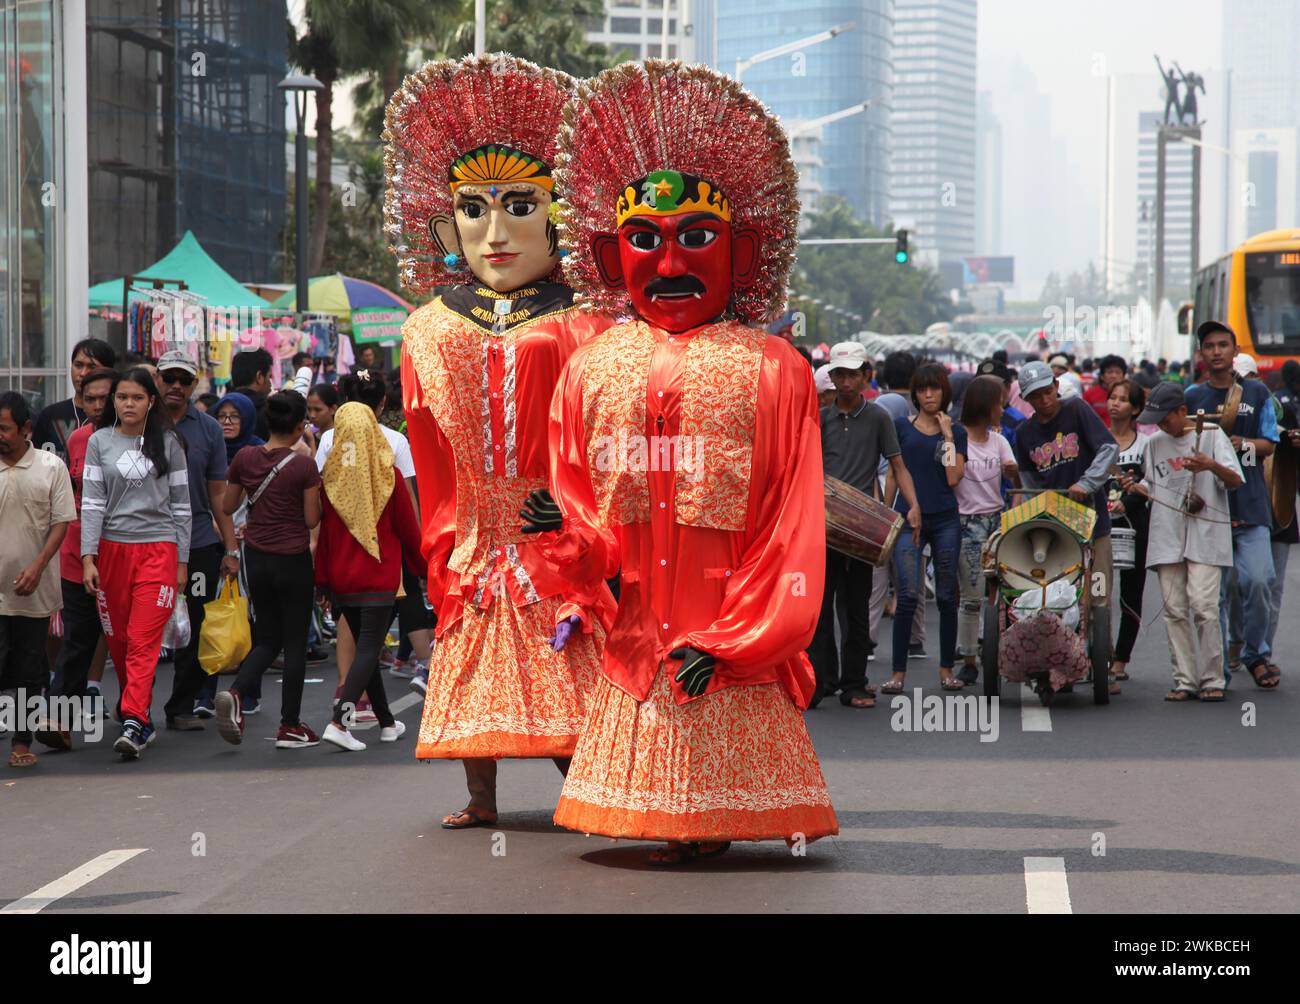 Ondel-ondel is a large puppet figure featured in the Betawi folk performance in Jakarta, Indonesia and utilized for livening up festivals. Stock Photo